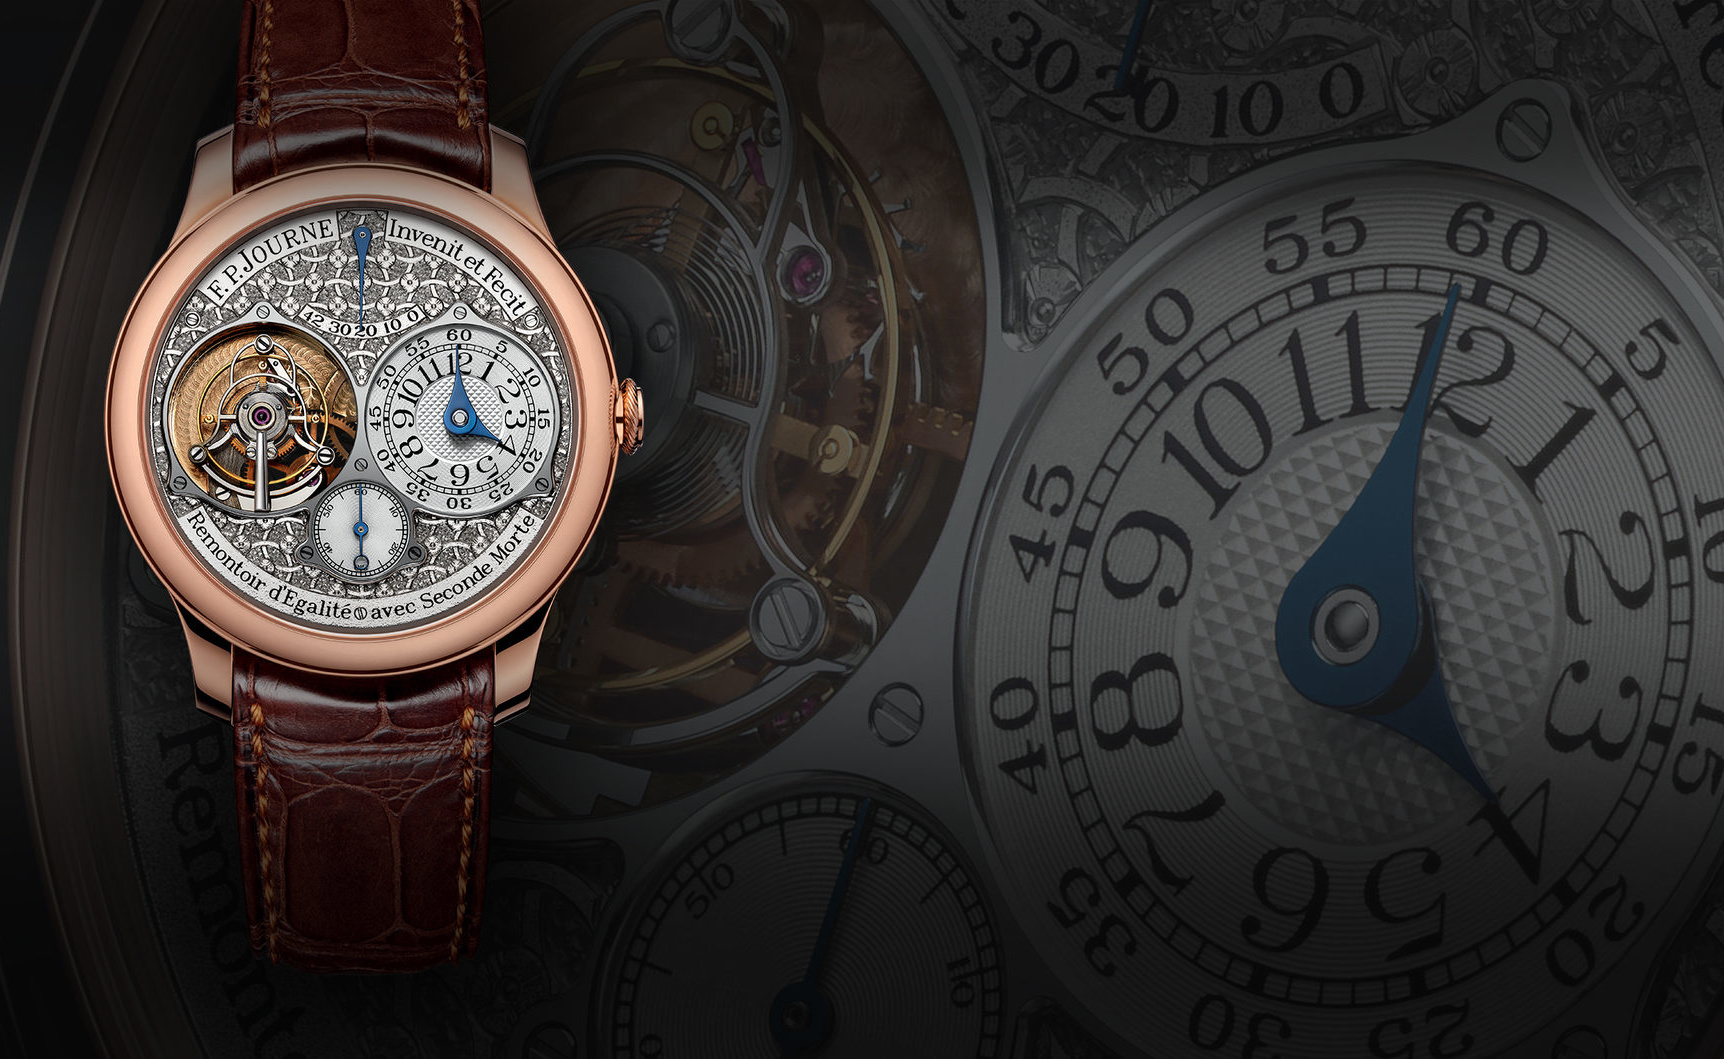 Régence Circulaire Hand-Engraved Dial for the F.P. Journe Tourbillon.